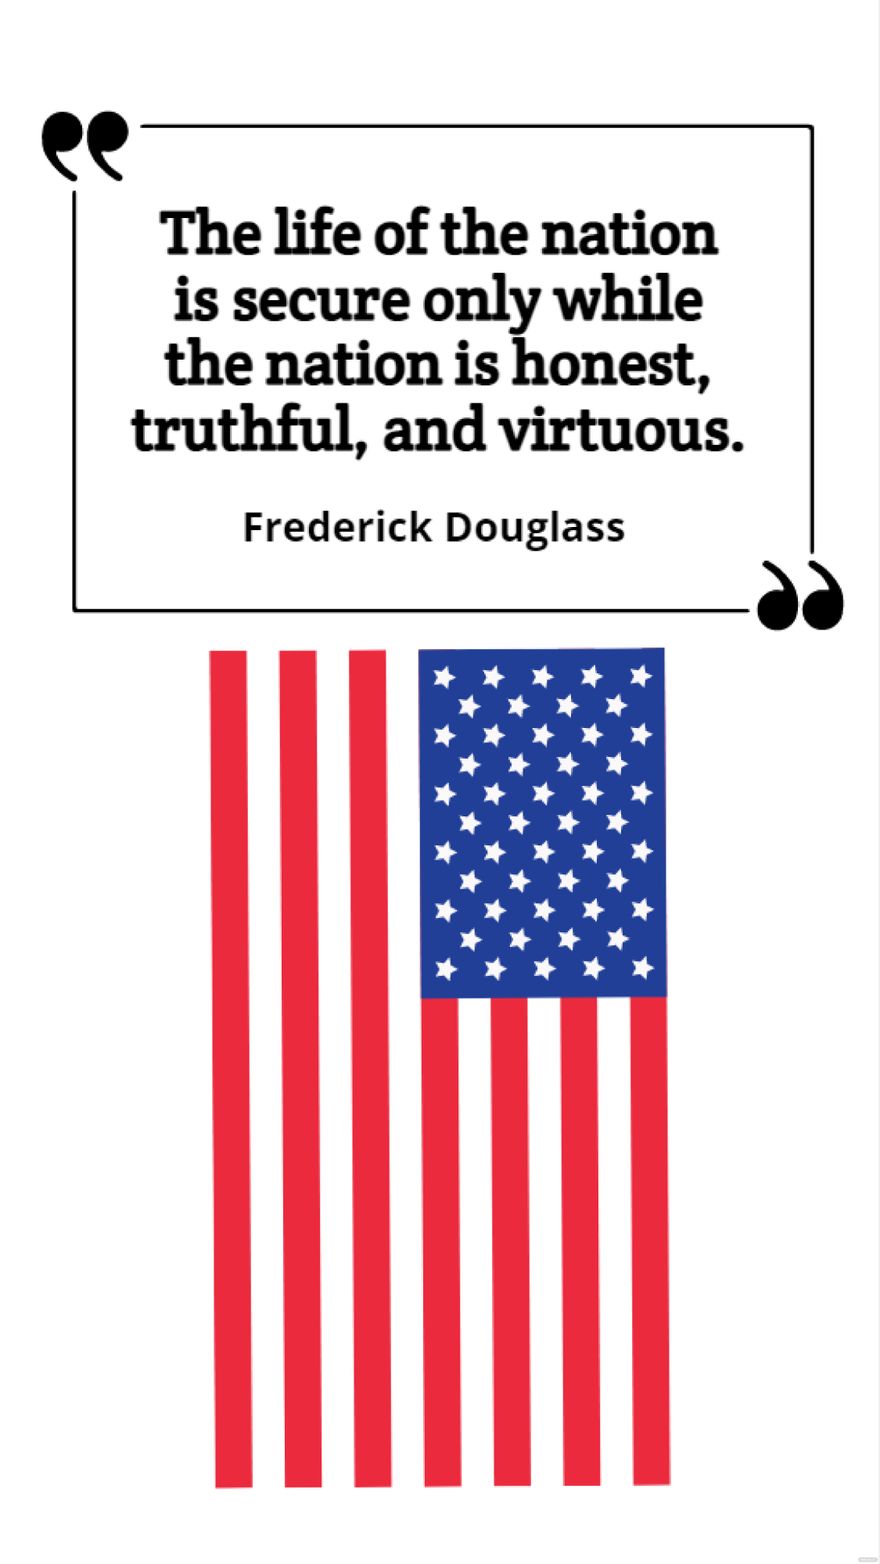 Free Frederick Douglass - The life of the nation is secure only while the nation is honest, truthful, and virtuous. in JPG